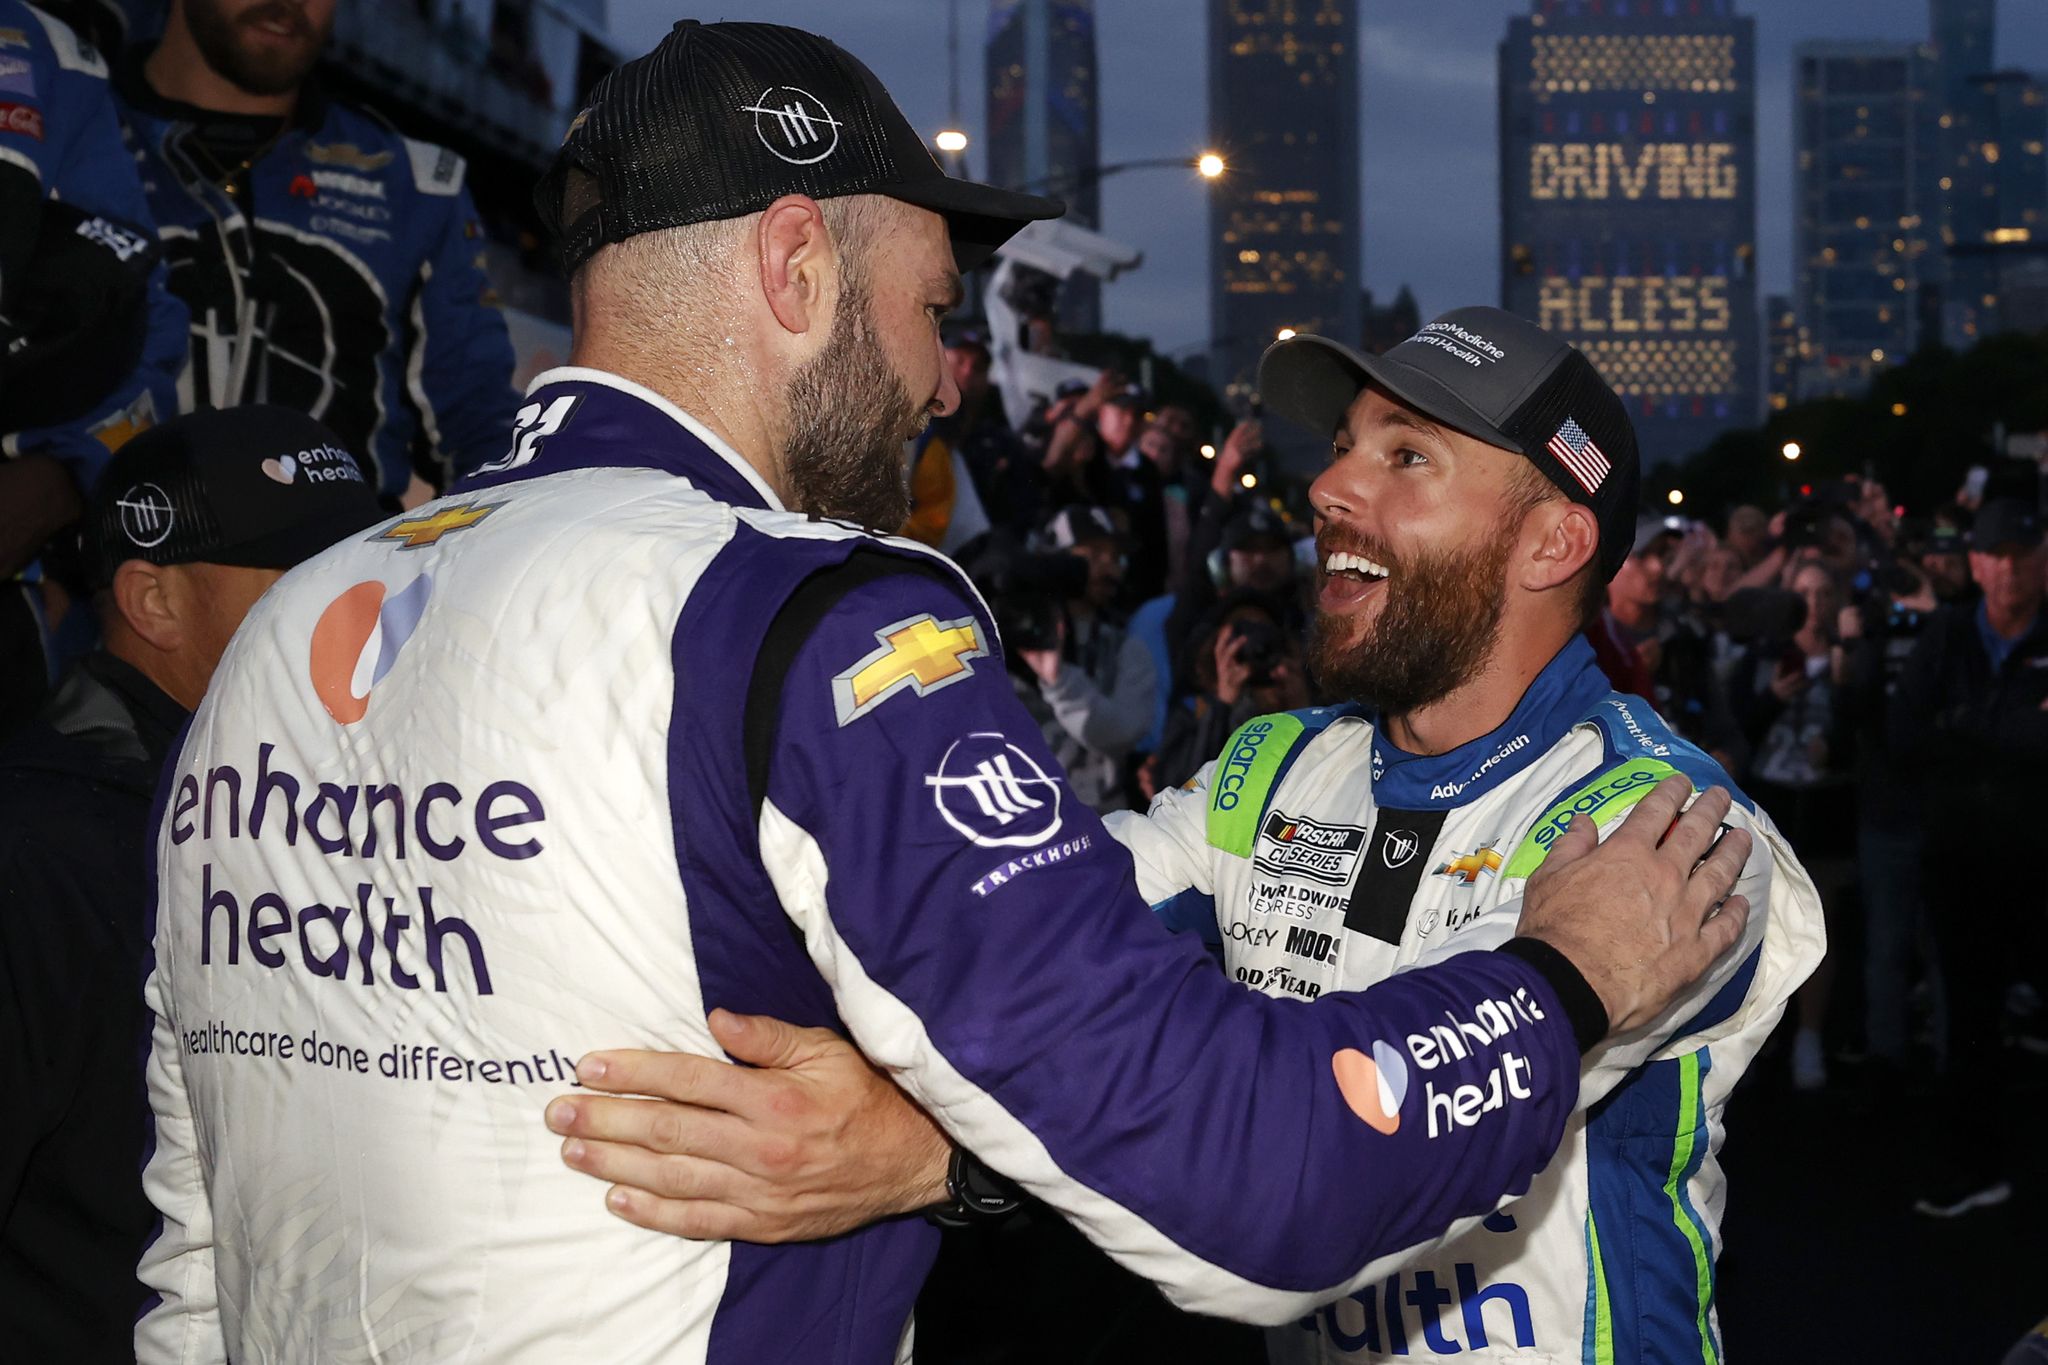 chicago, illinois july 02 shane van gisbergen, driver of the 91 enhance health chevrolet, is congratulated by ross chastain, driver of the 1 adventhealth chevrolet, r victory lane after winning the nascar cup series grant park 220 at the chicago street course on july 02, 2023 in chicago, illinois photo by chris graythengetty images